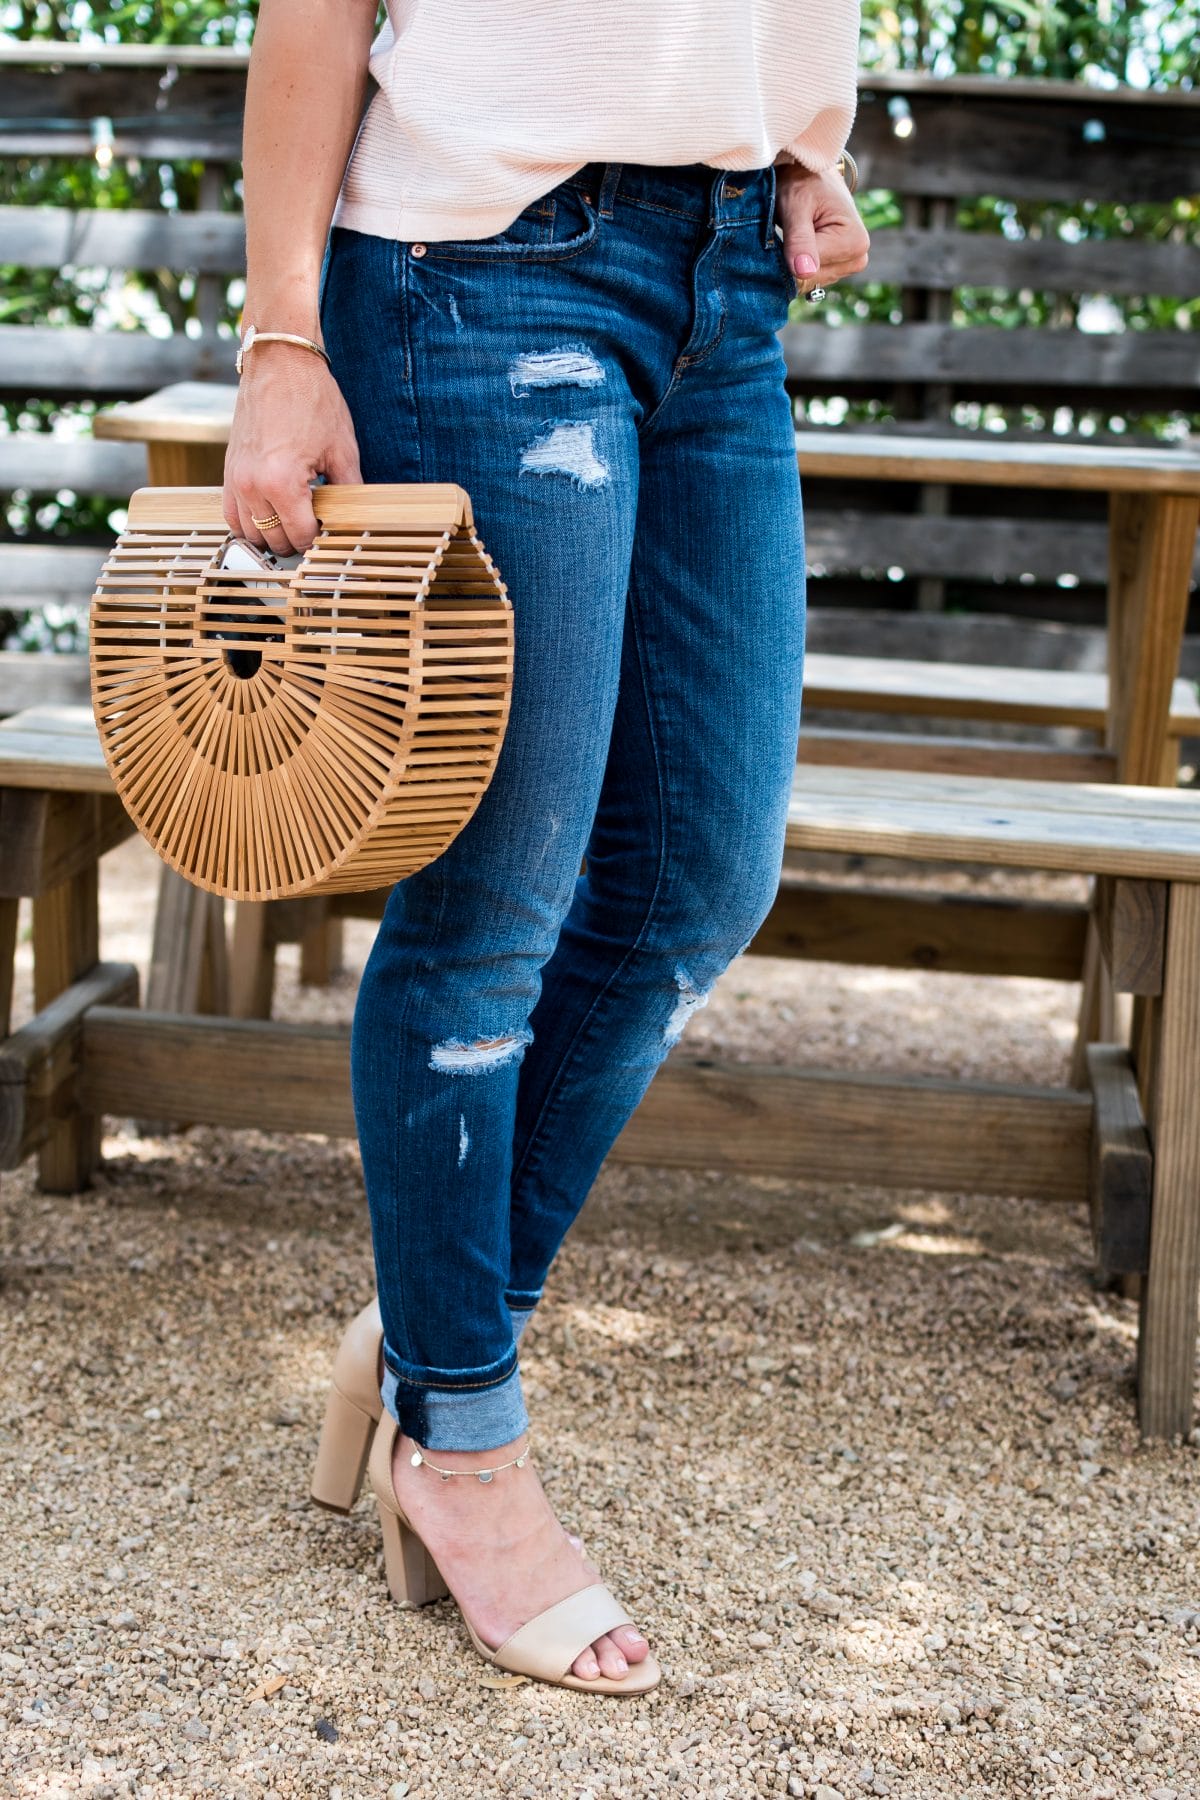 Spring Outfit- pink flutter sleeve top with distressed jeans, wooden bag, and heels 